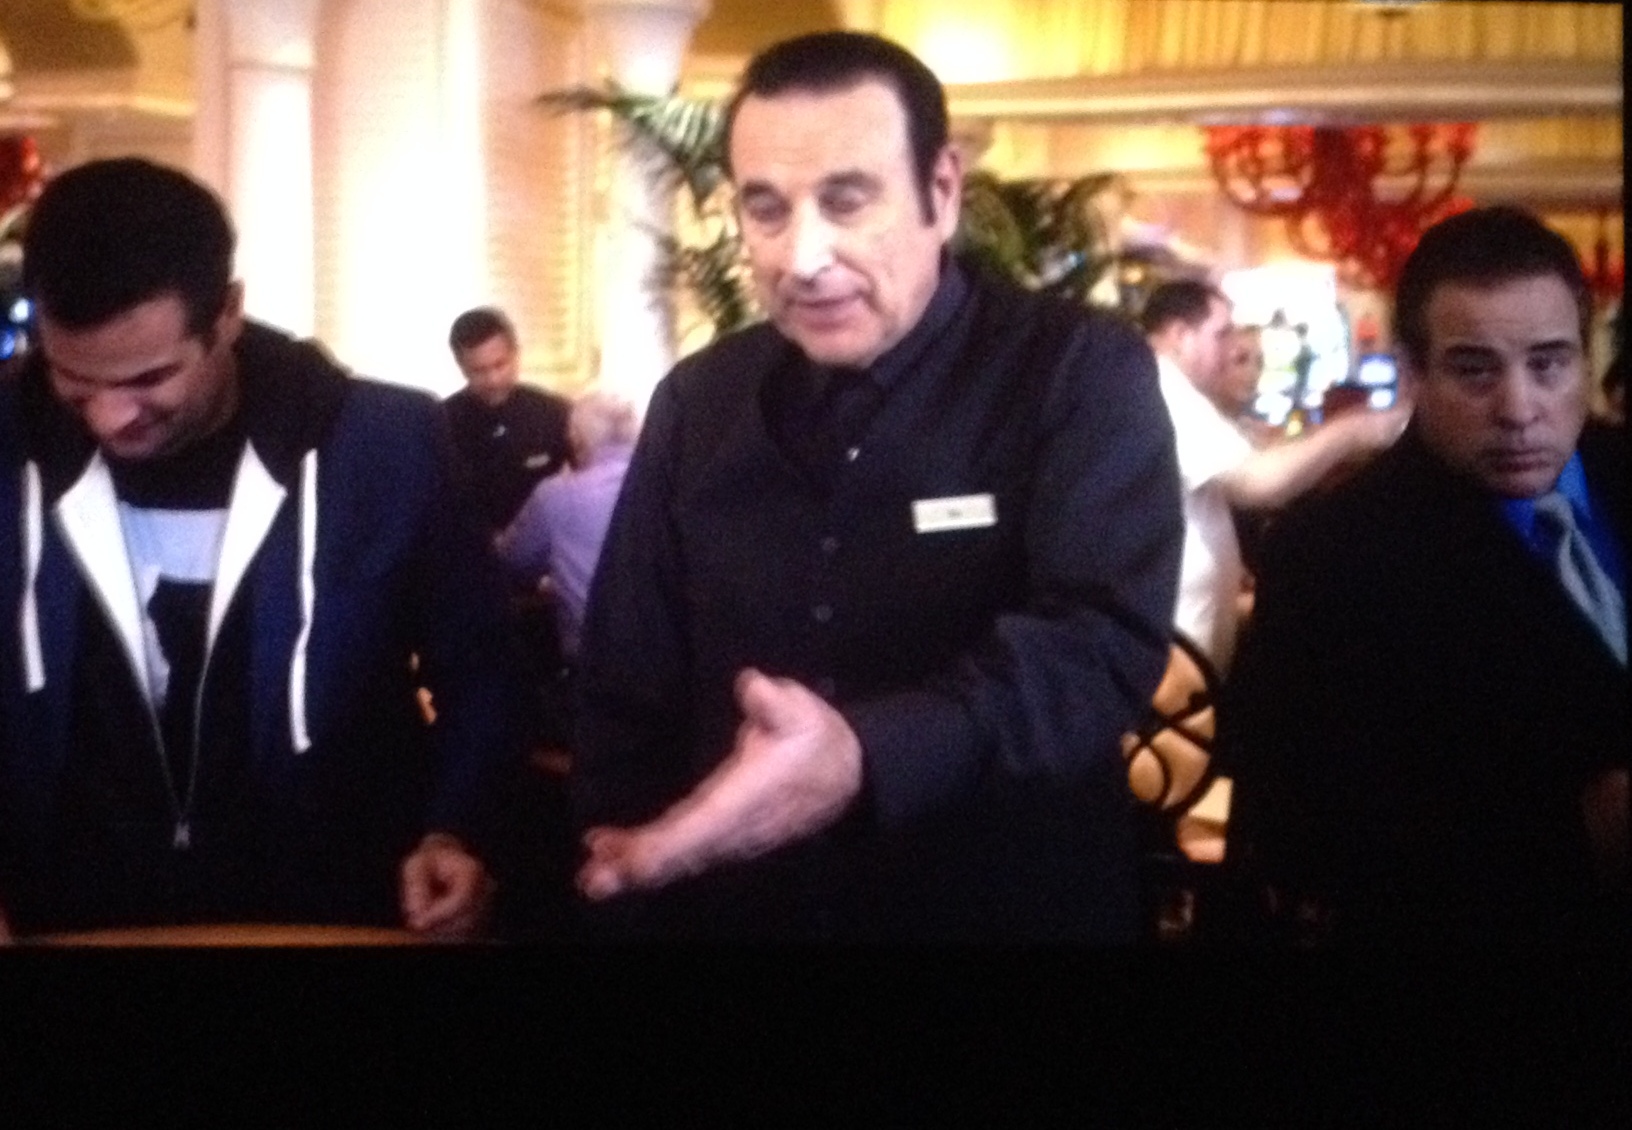 Paul Blart Mall Cop 2, Dean Mauro playing Pit boss stares down Kevin James